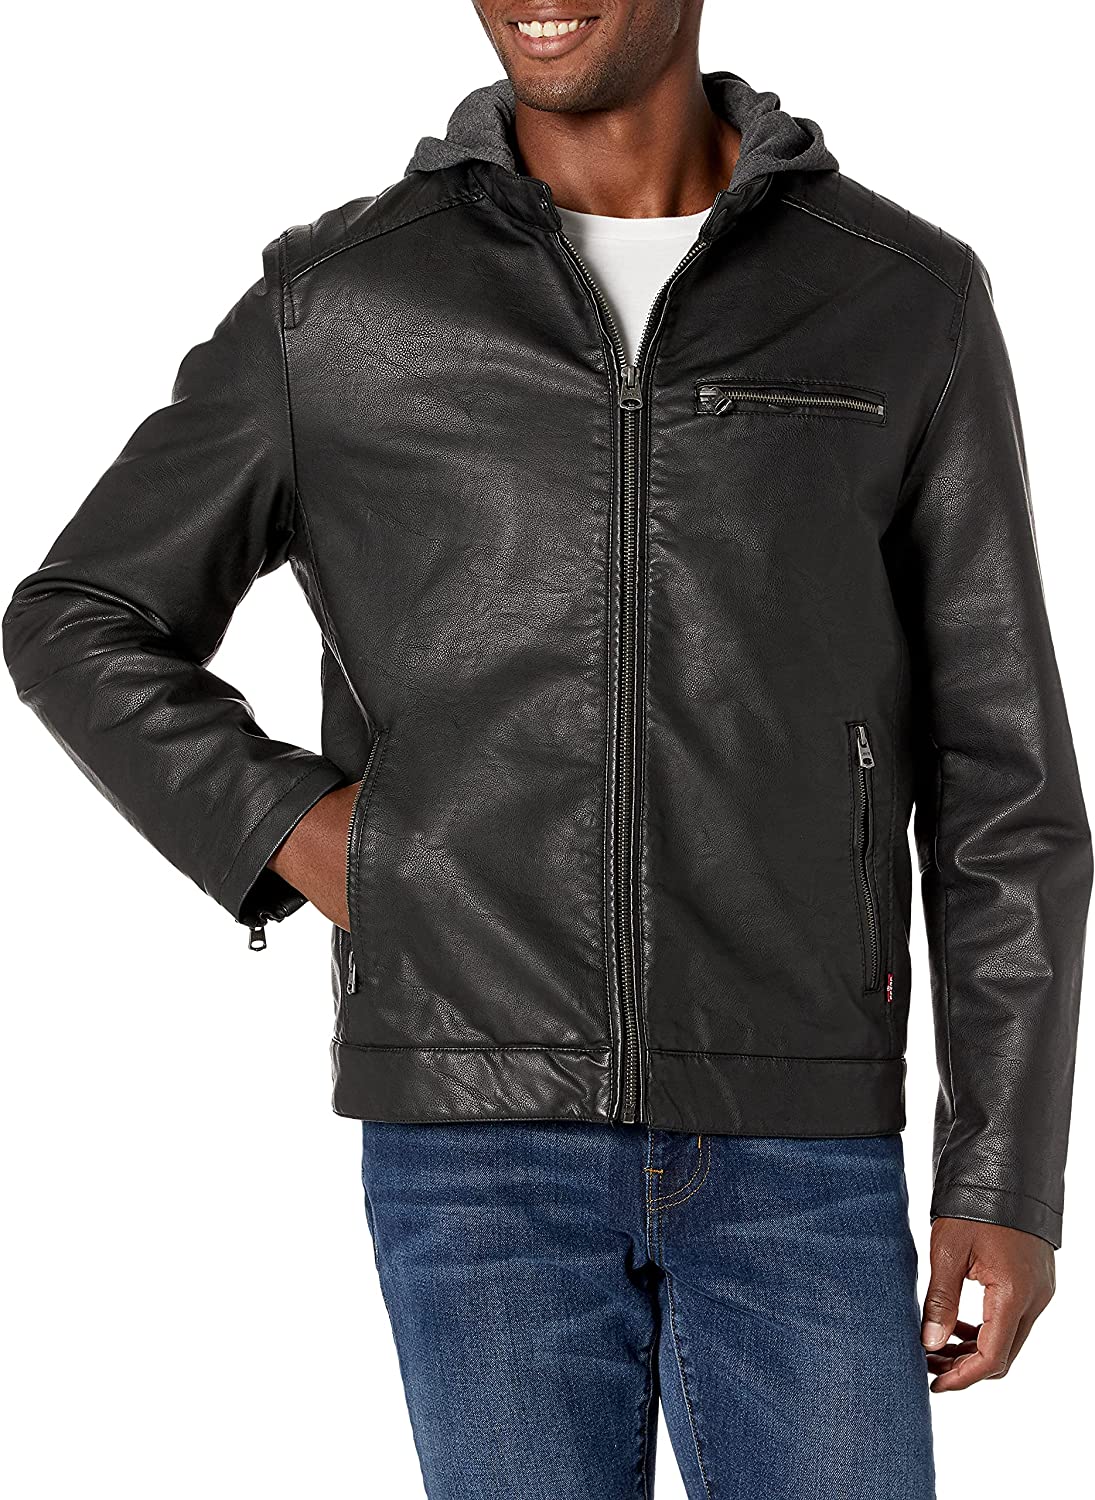 Levi's Men's Rugged Faux Leather Racer Jacket with Hood | eBay